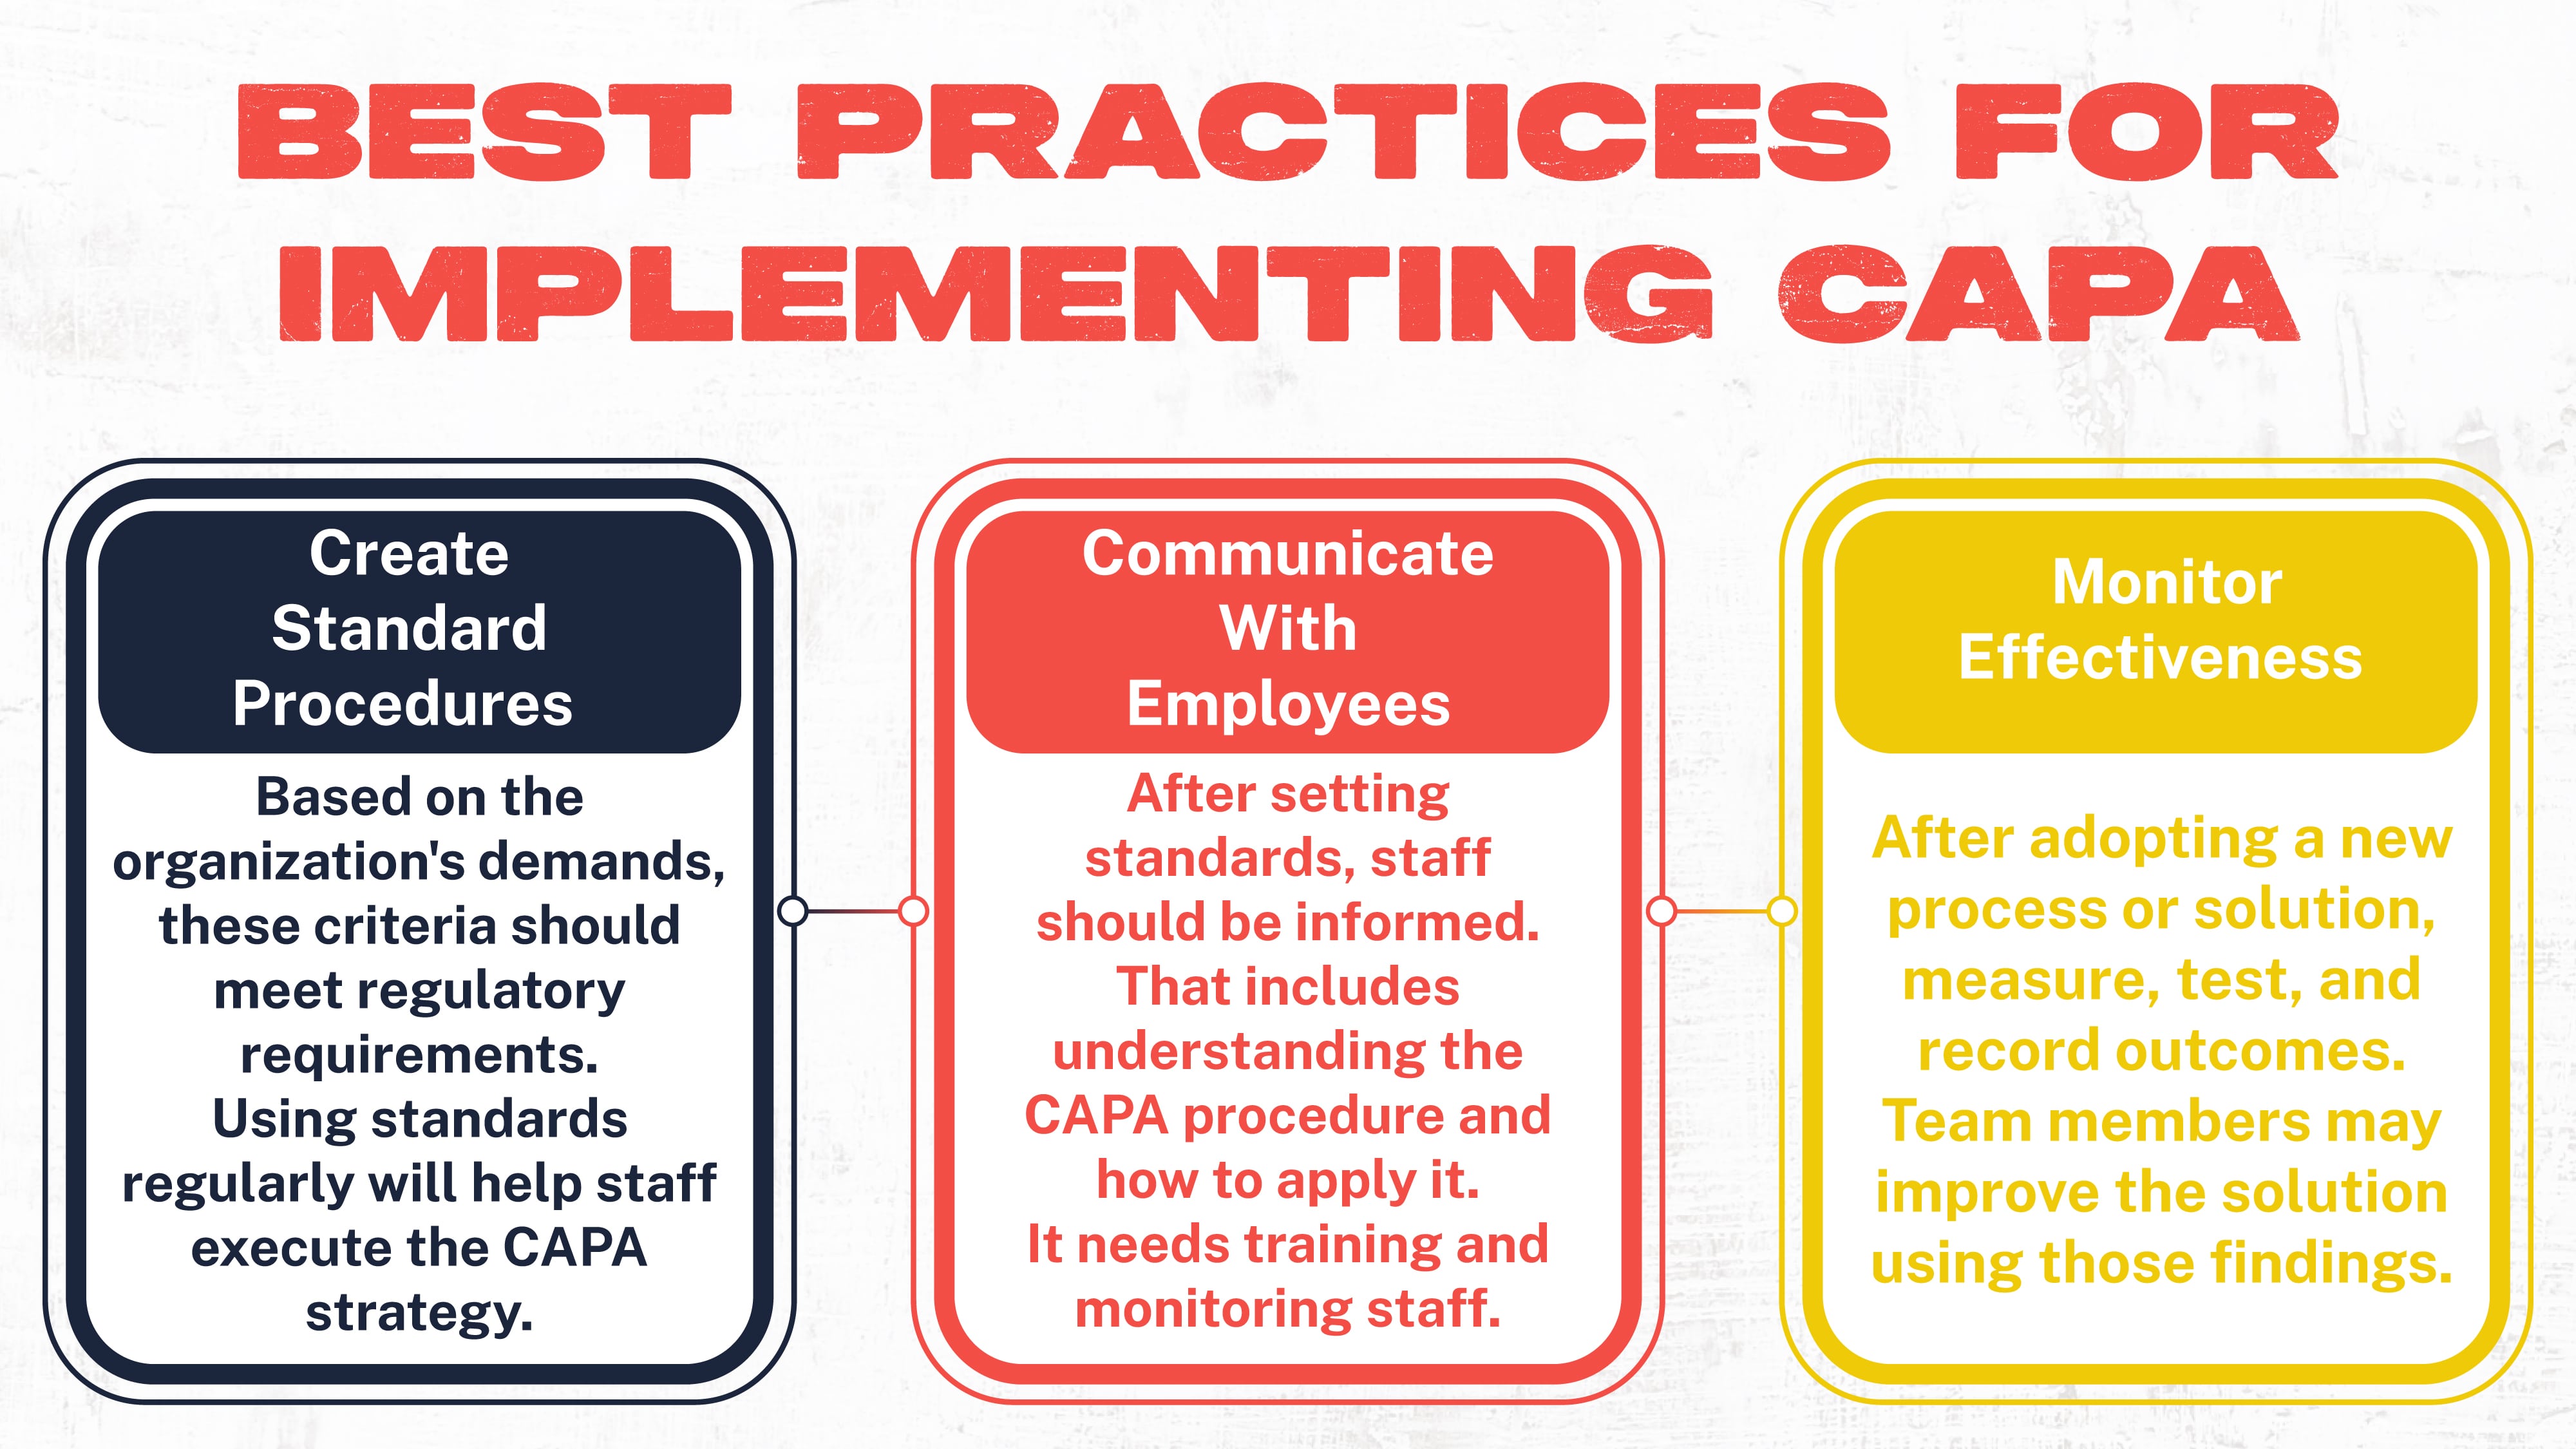 Best Practices for Implementing CAPA